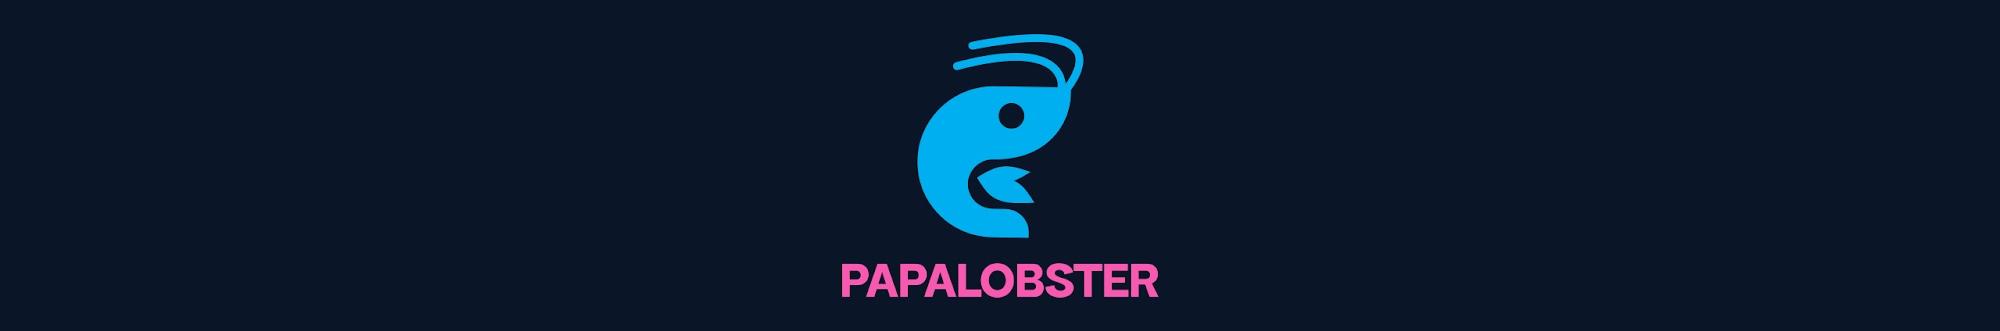 PapaLobster